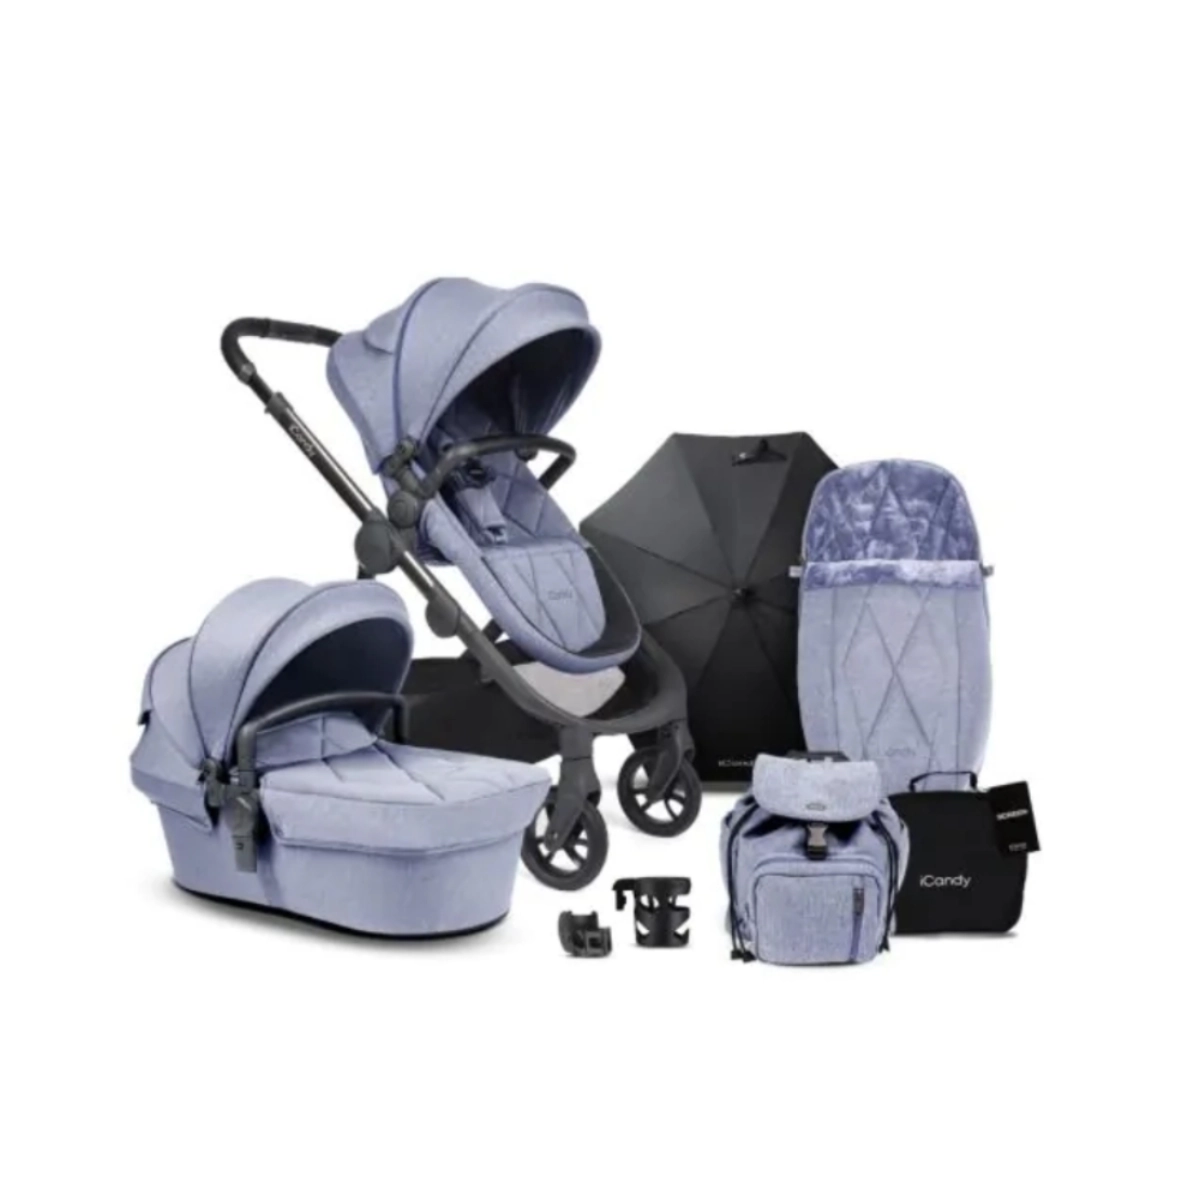 Image of iCandy Orange Pushchair and Carrycot Complete Bundle-Mist Blue Marl